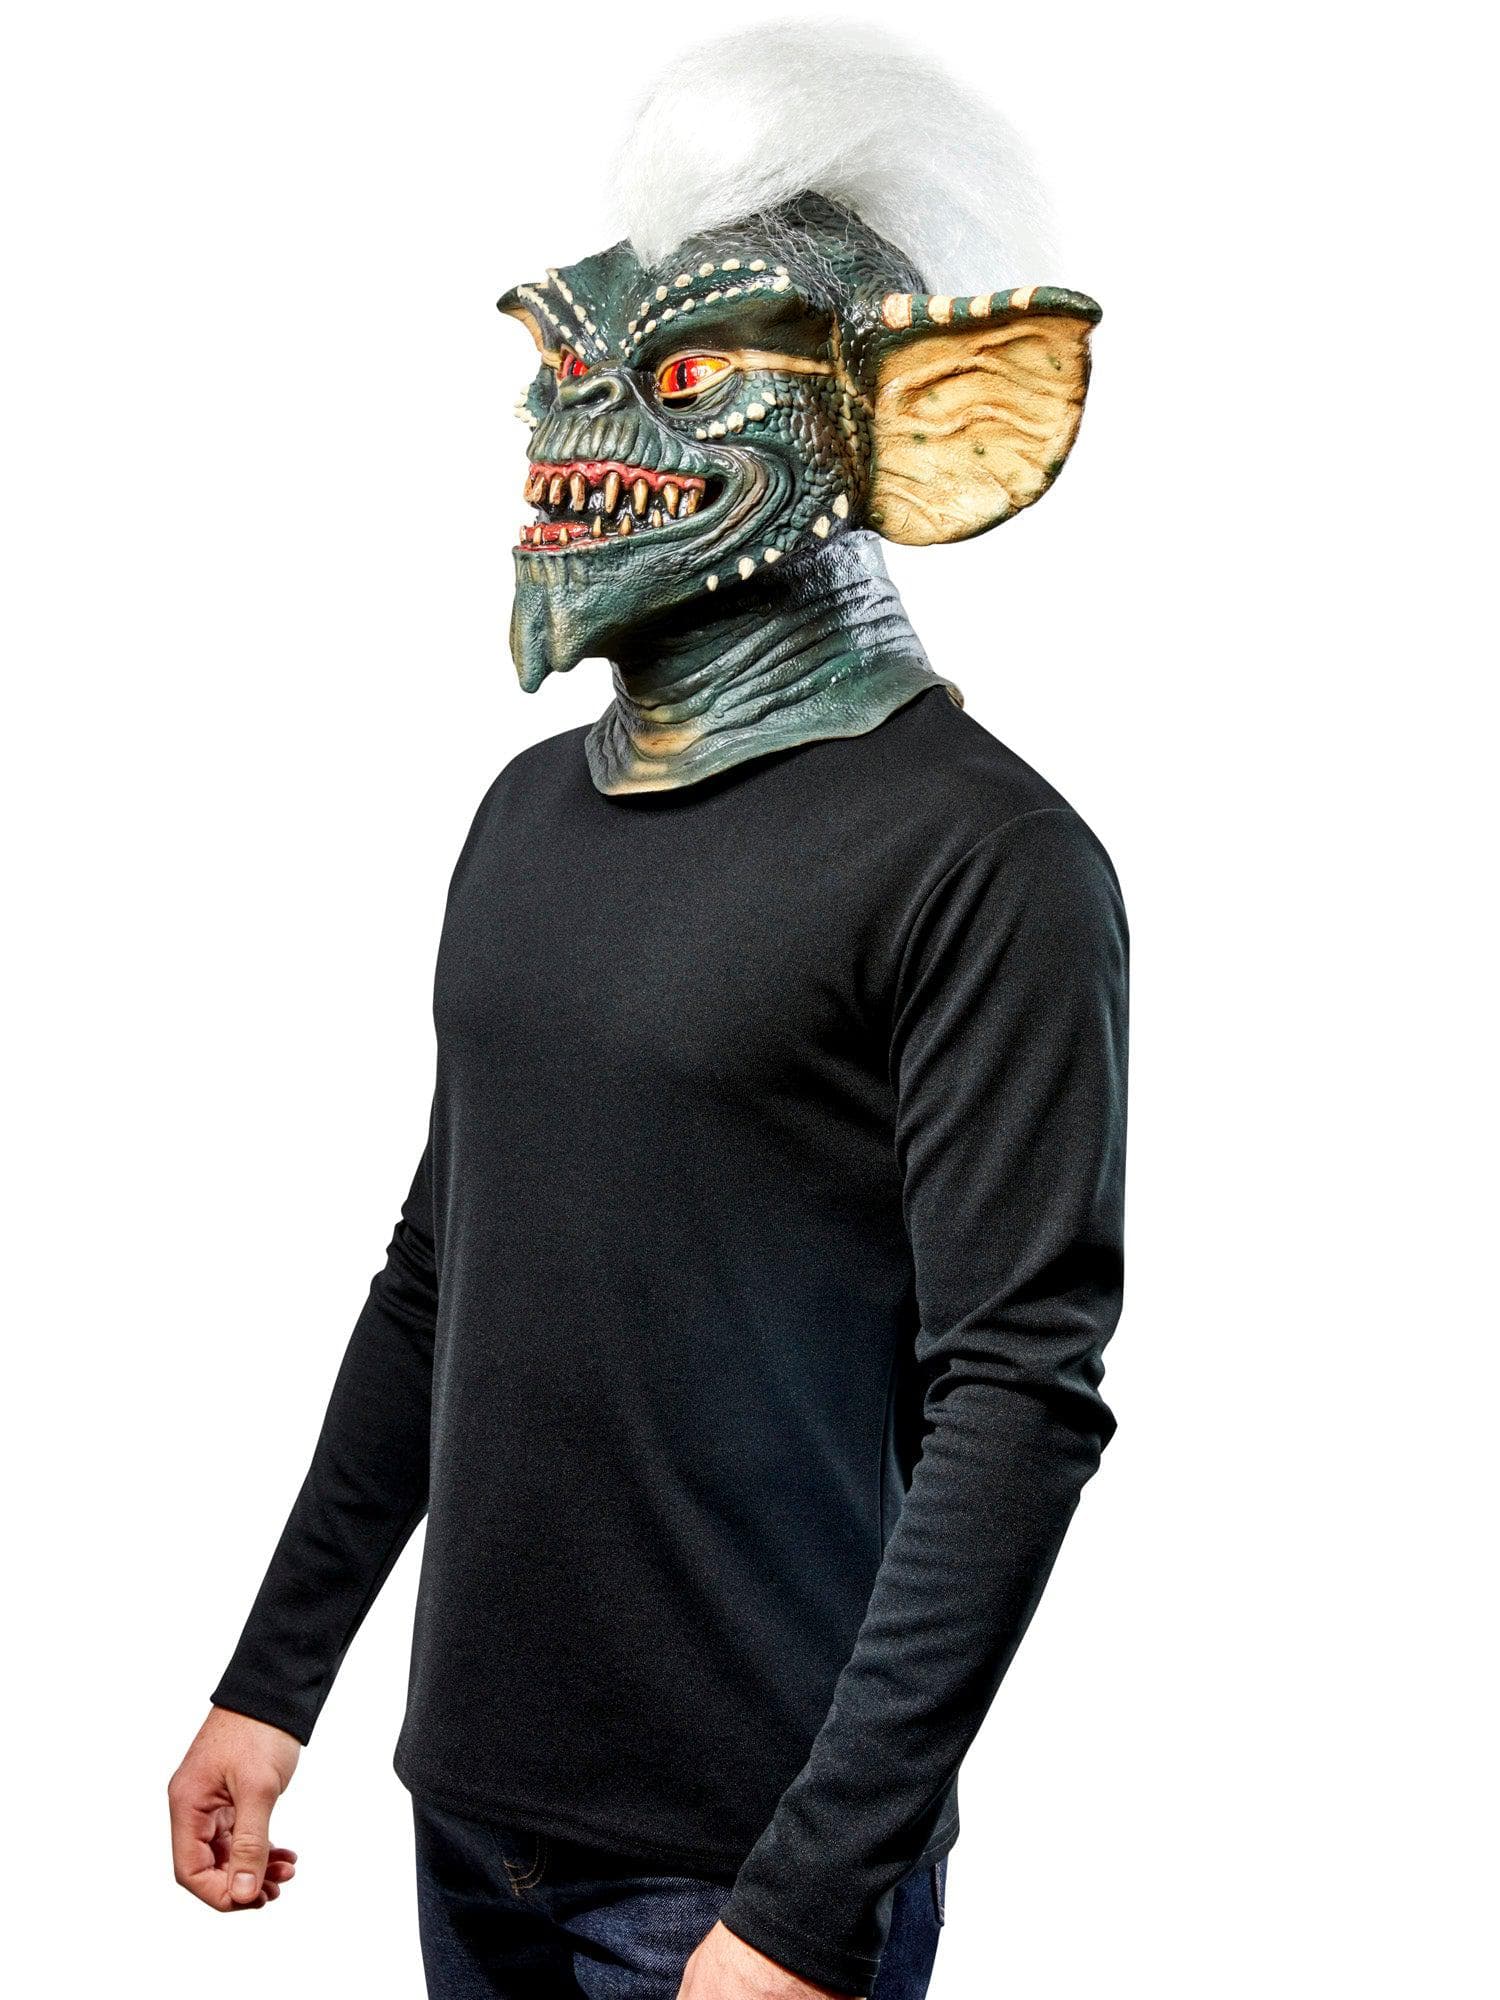 Adult Gremlins Stripe Latex Mask - Deluxe - costumes.com